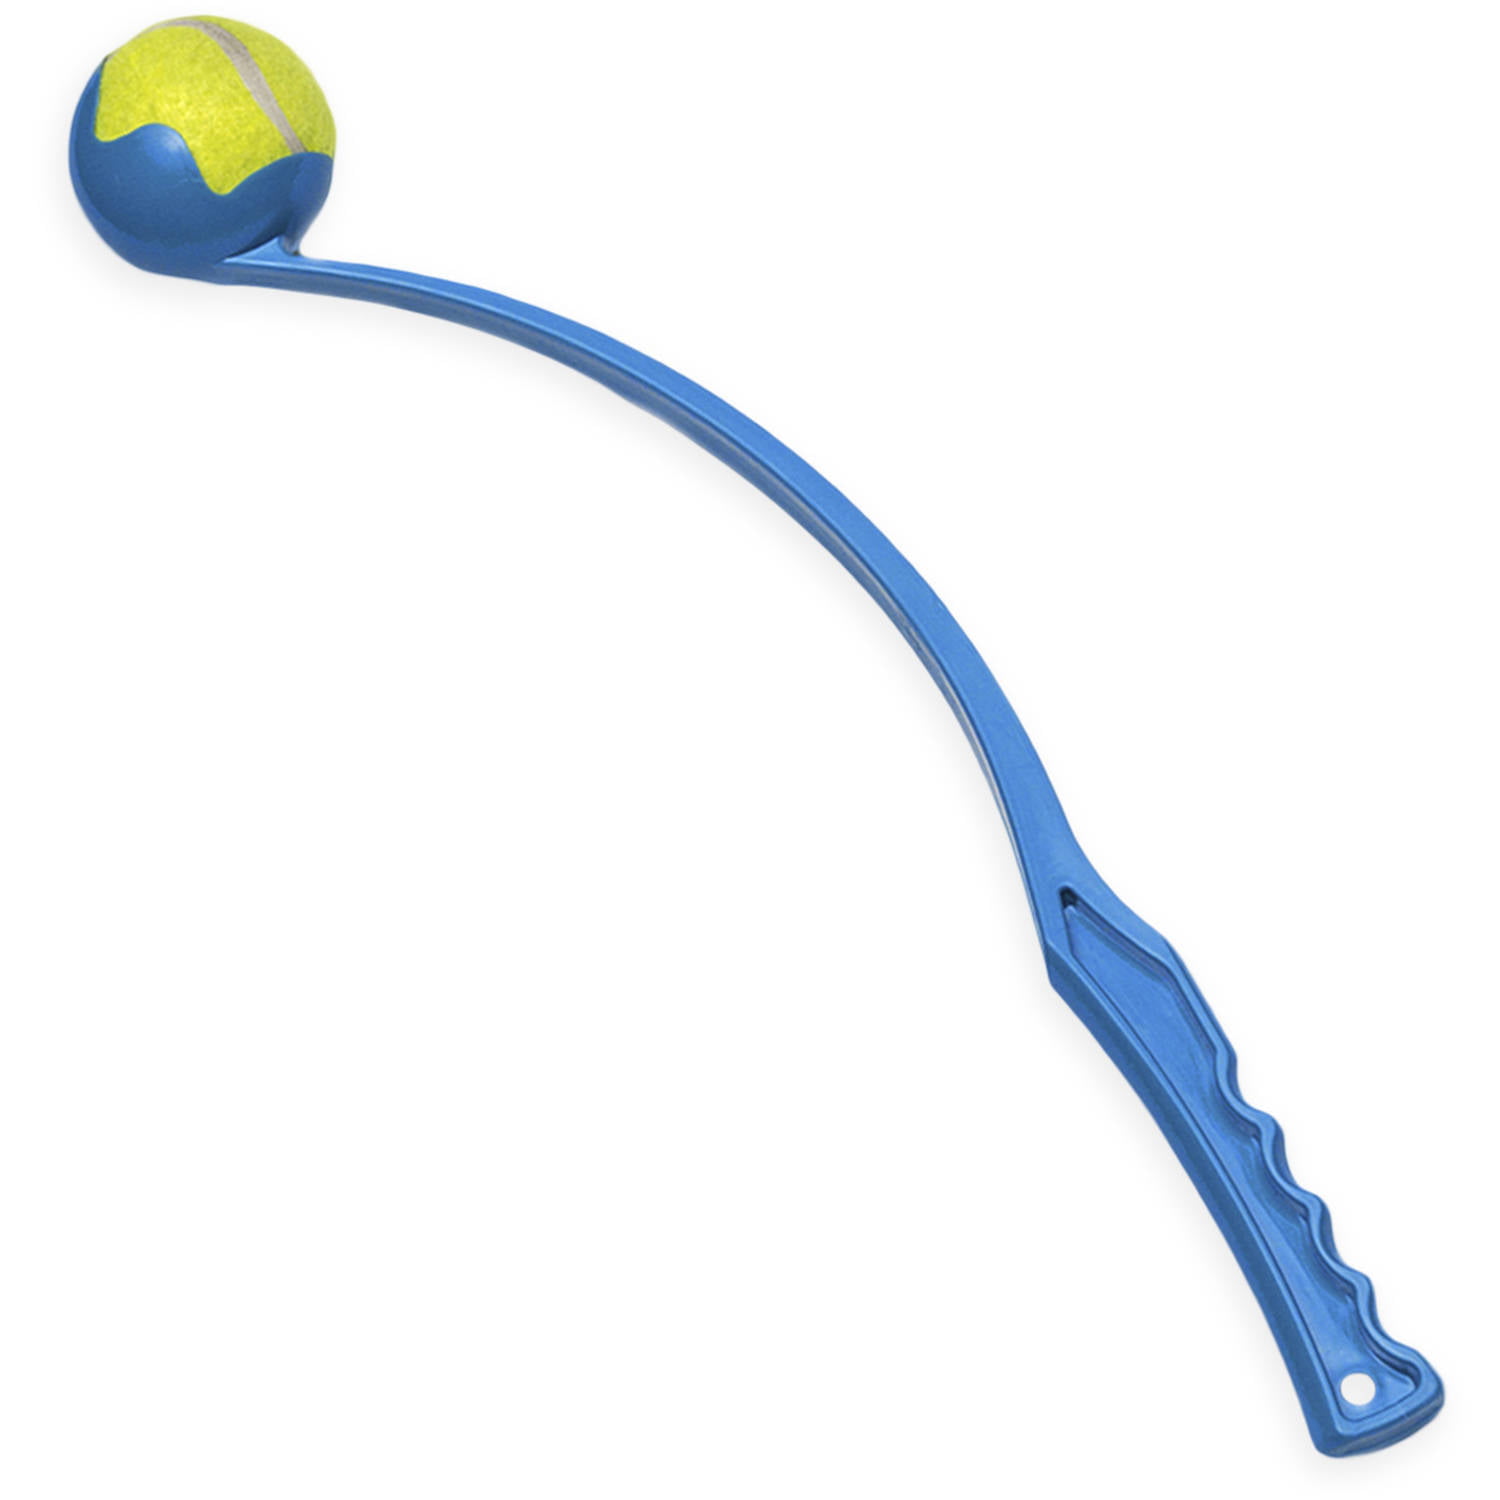 electric ball thrower